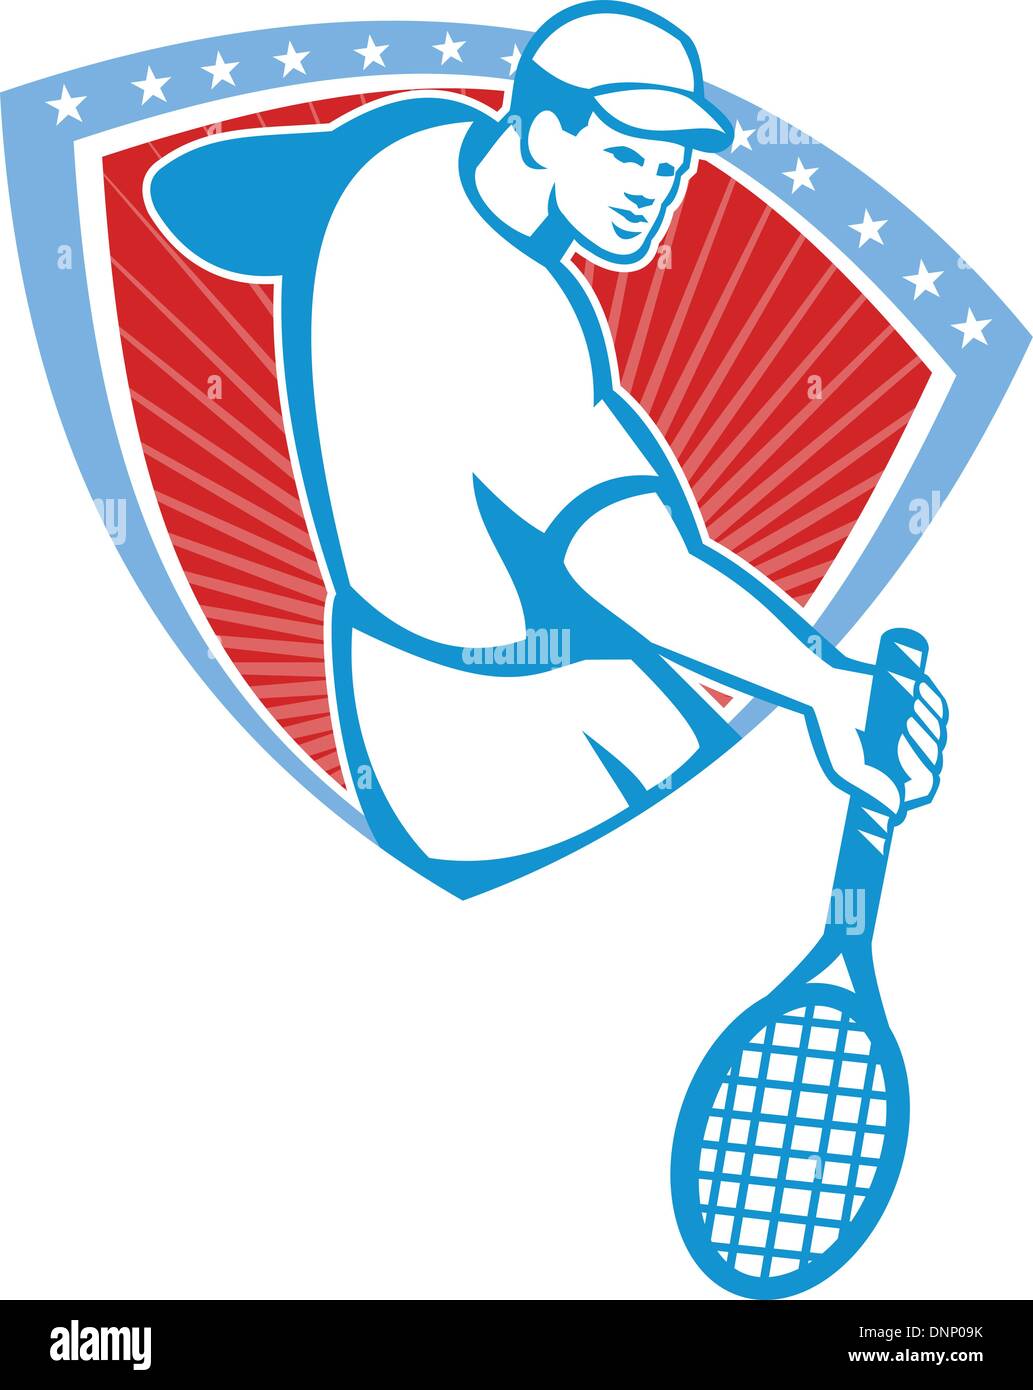 Illustration of a tennis player holding racquet set inside crest shield with stars on isolated background done in retro style. Stock Vector